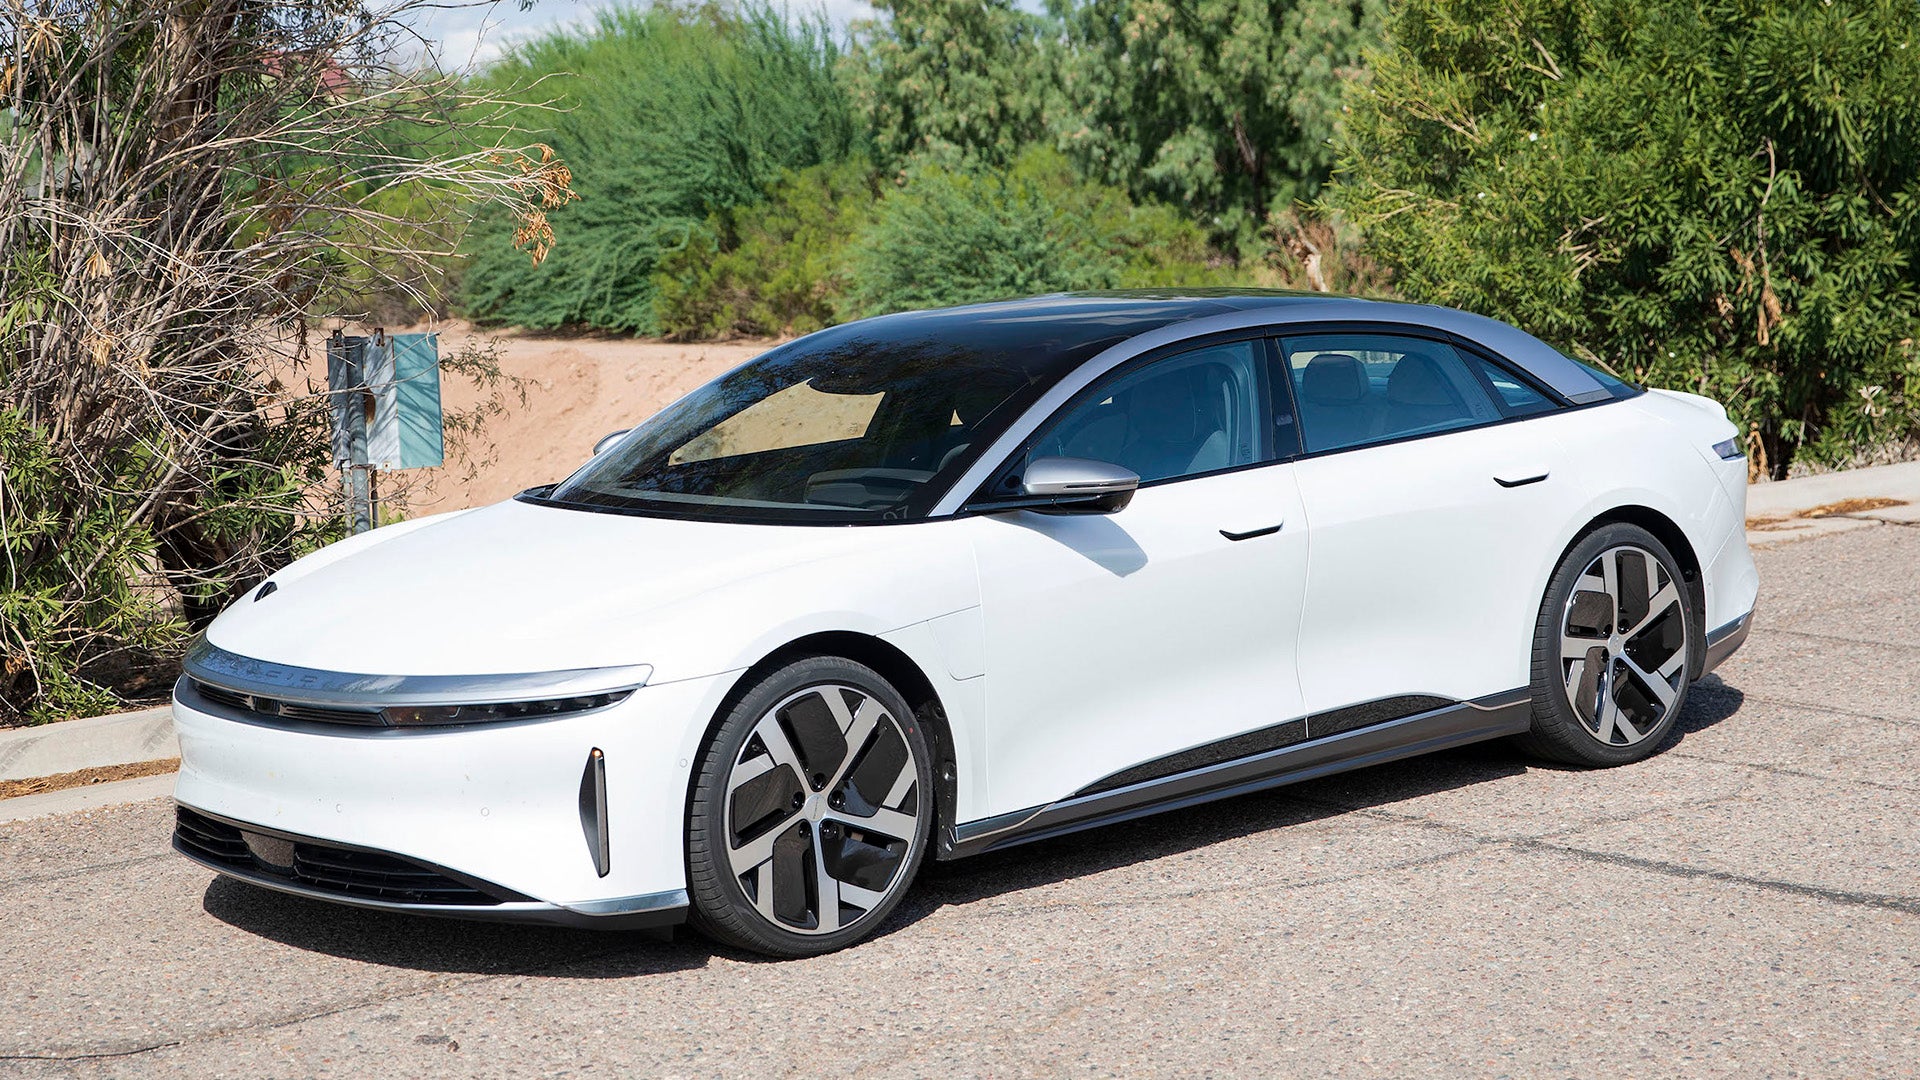 2022 Lucid Air First Drive Review: 520 Miles of Range Aimed at Tesla